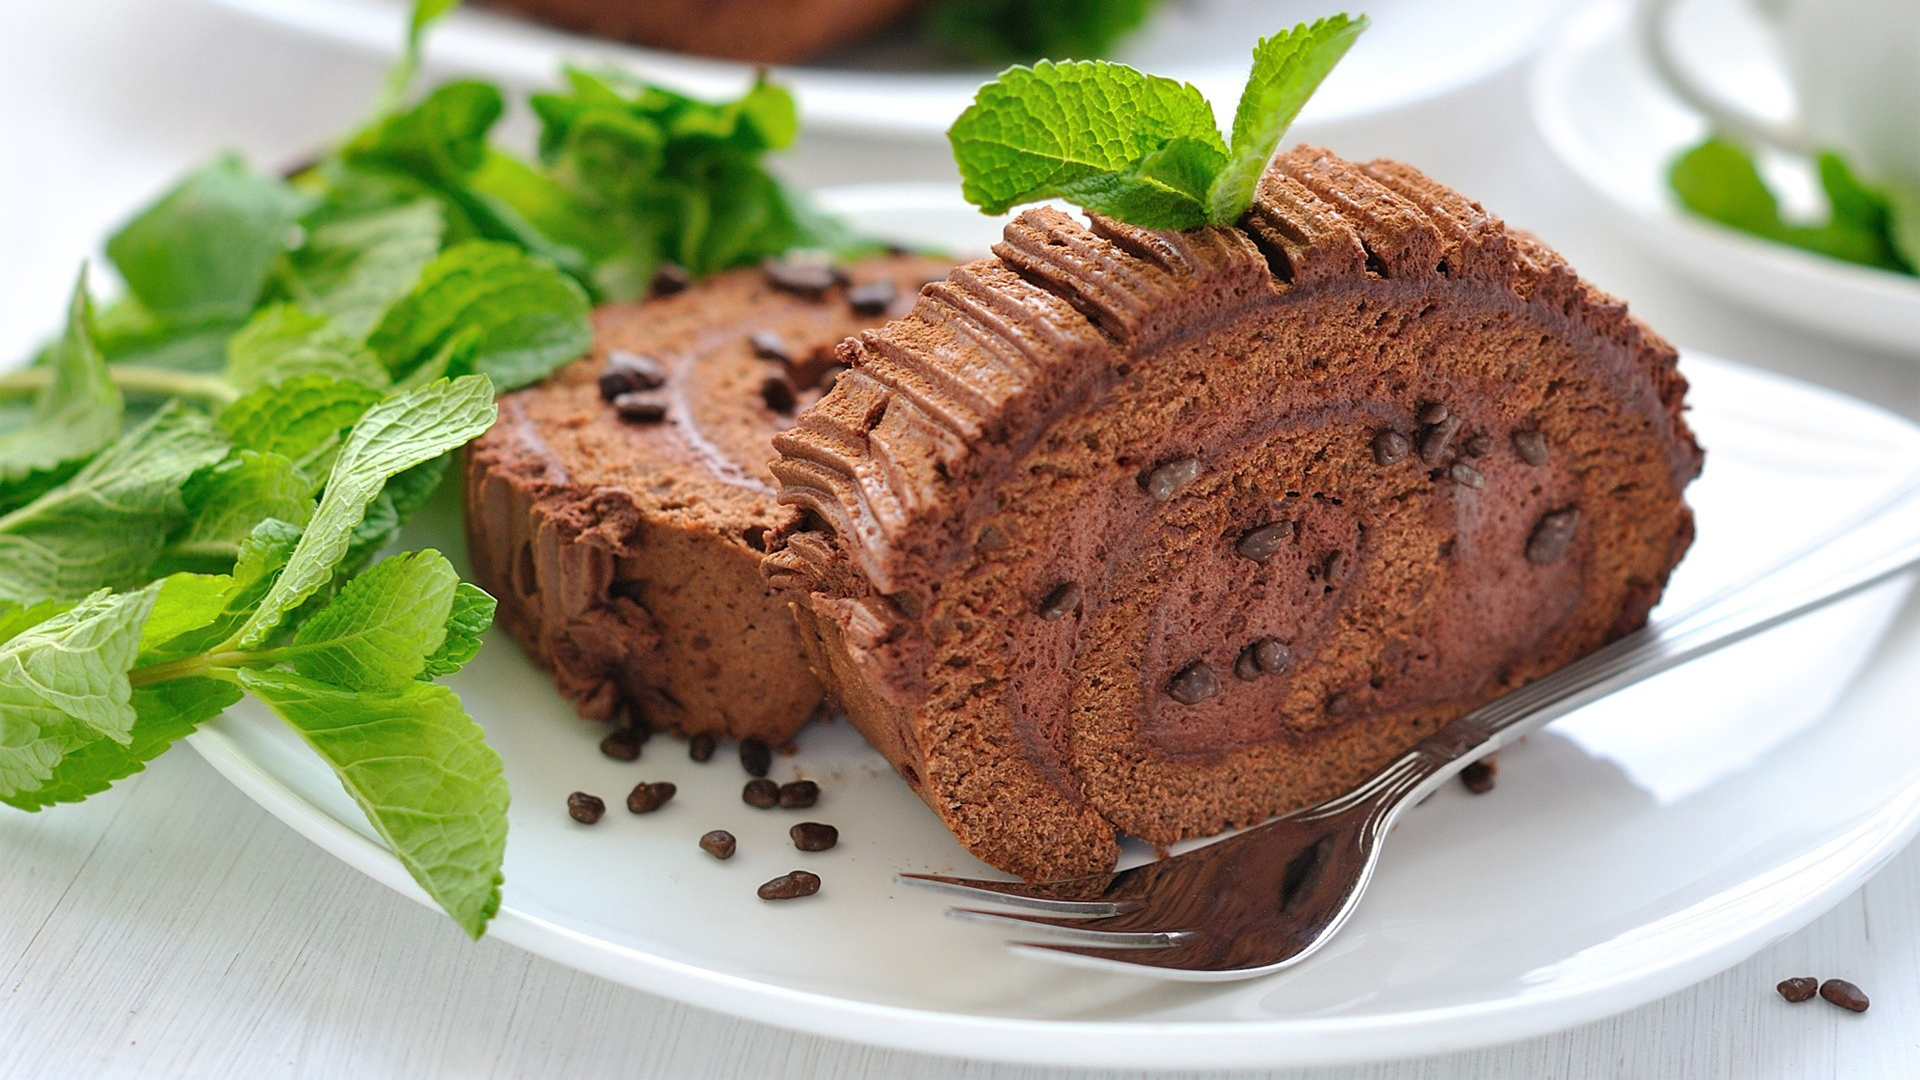 Chocolate Fork Mint Leaves Cake Plates 1920x1080